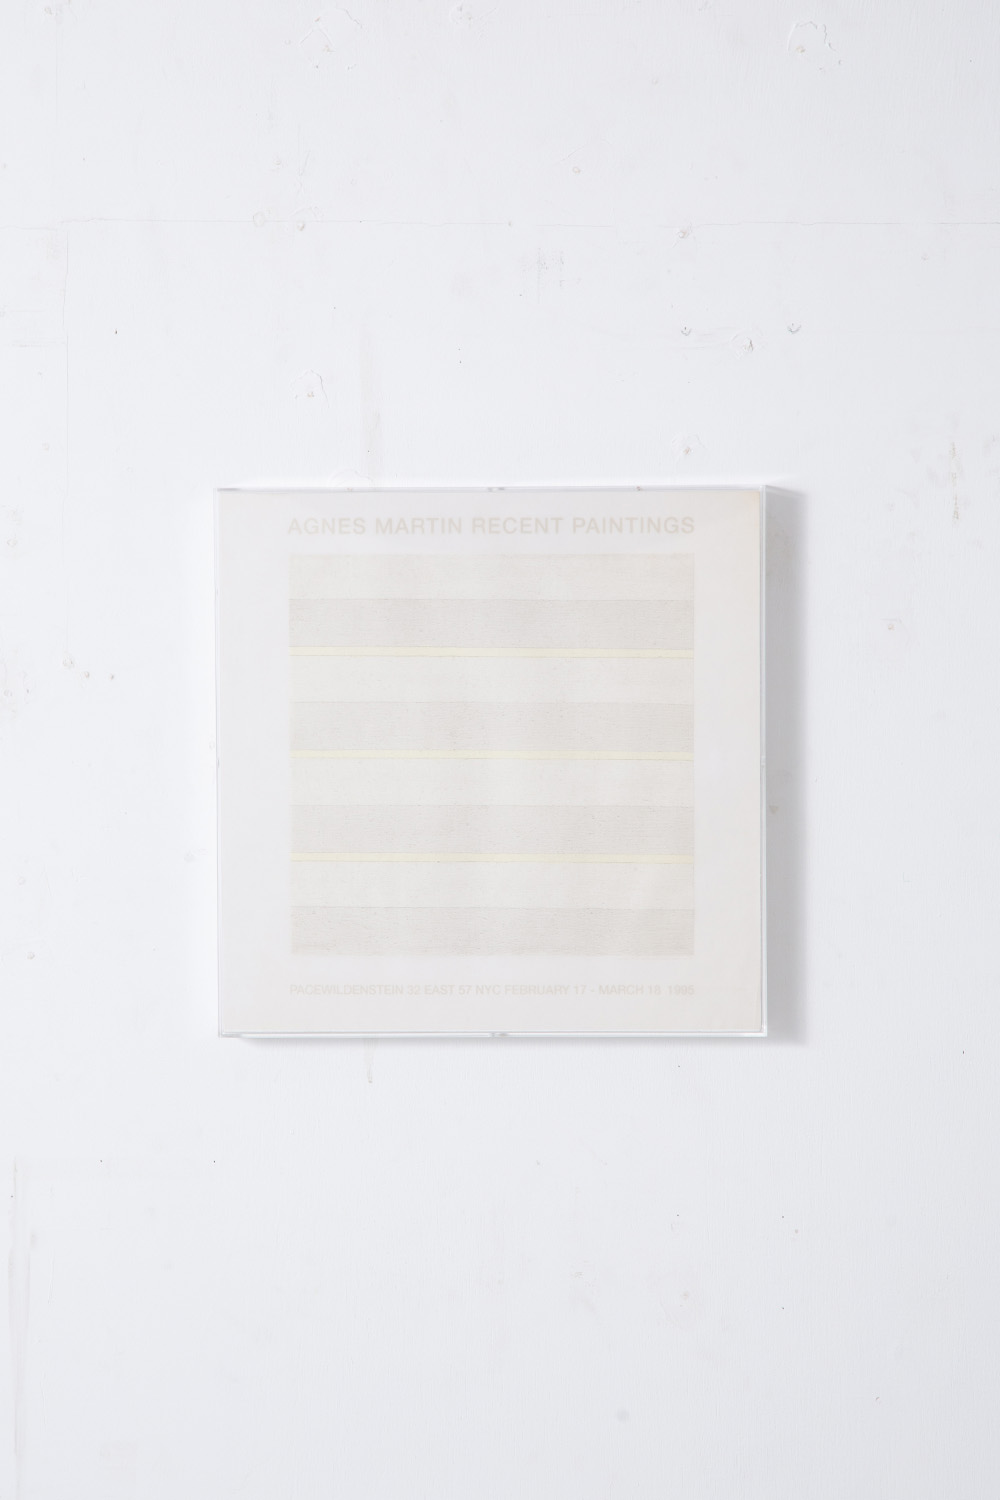 ‘Untitled’ by Agnes Martin for The Pace Gallery , 1995